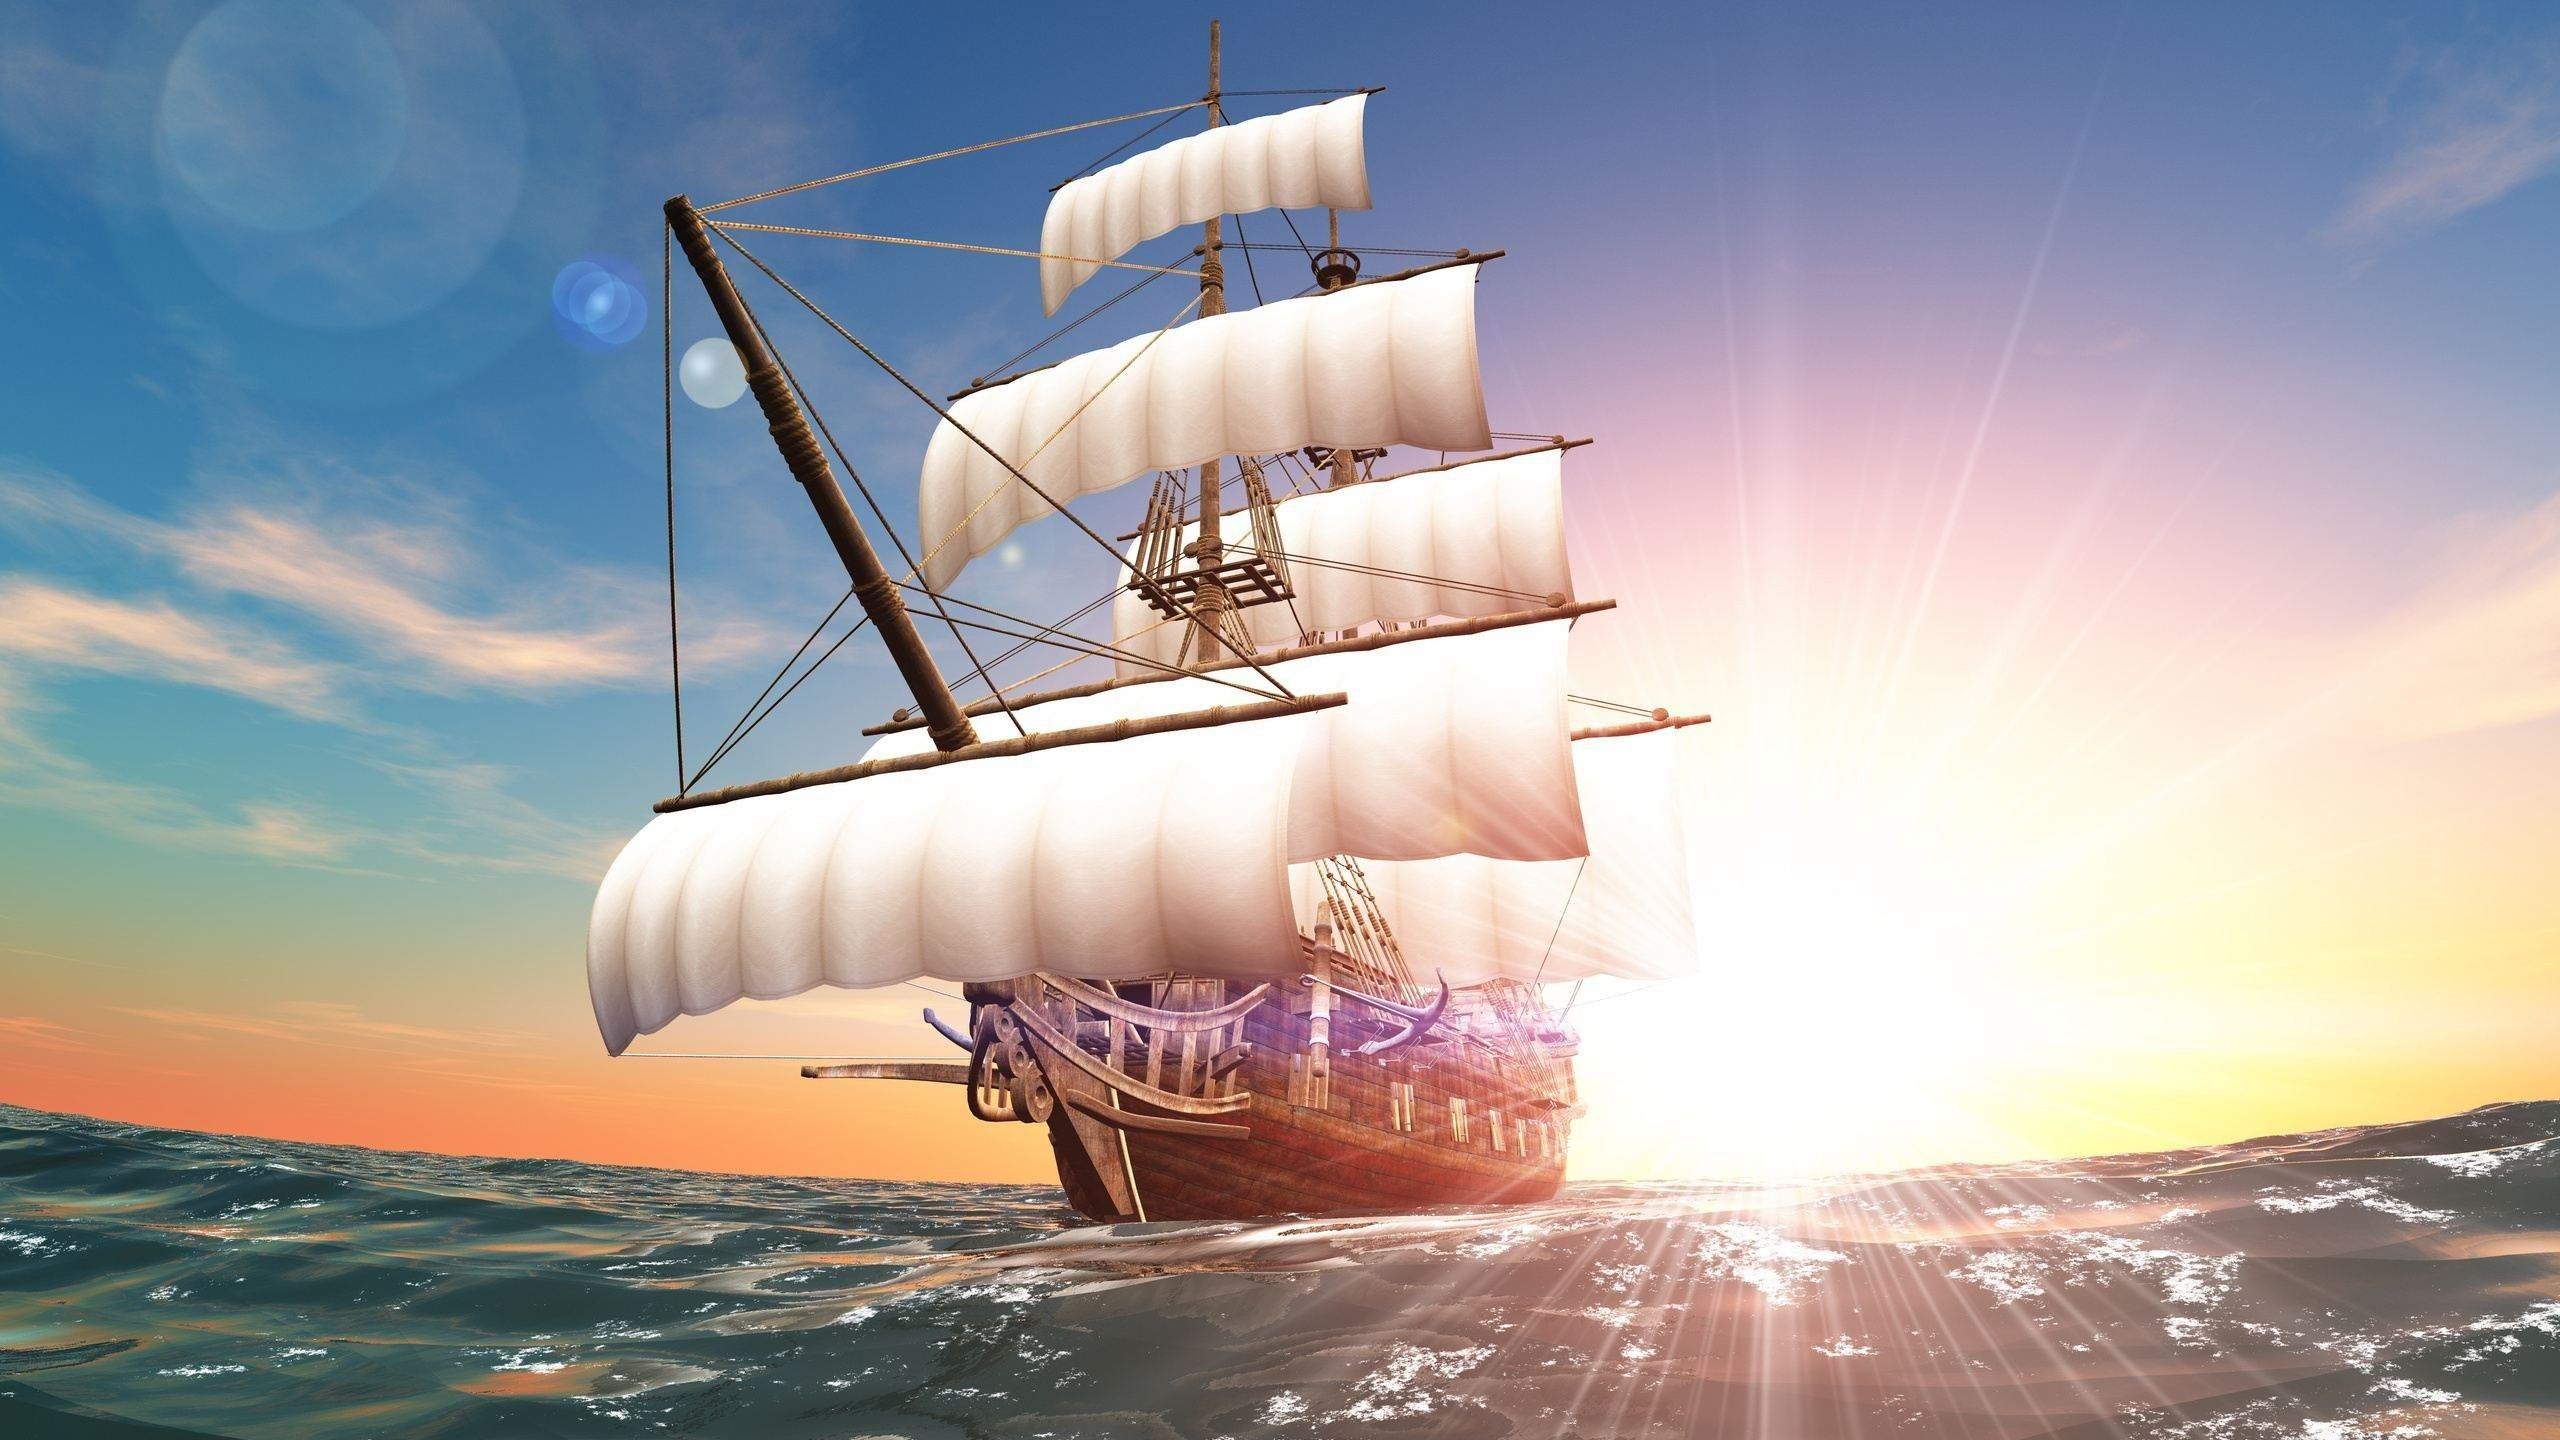 Ship Wallpapers   Top Free Ship Backgrounds